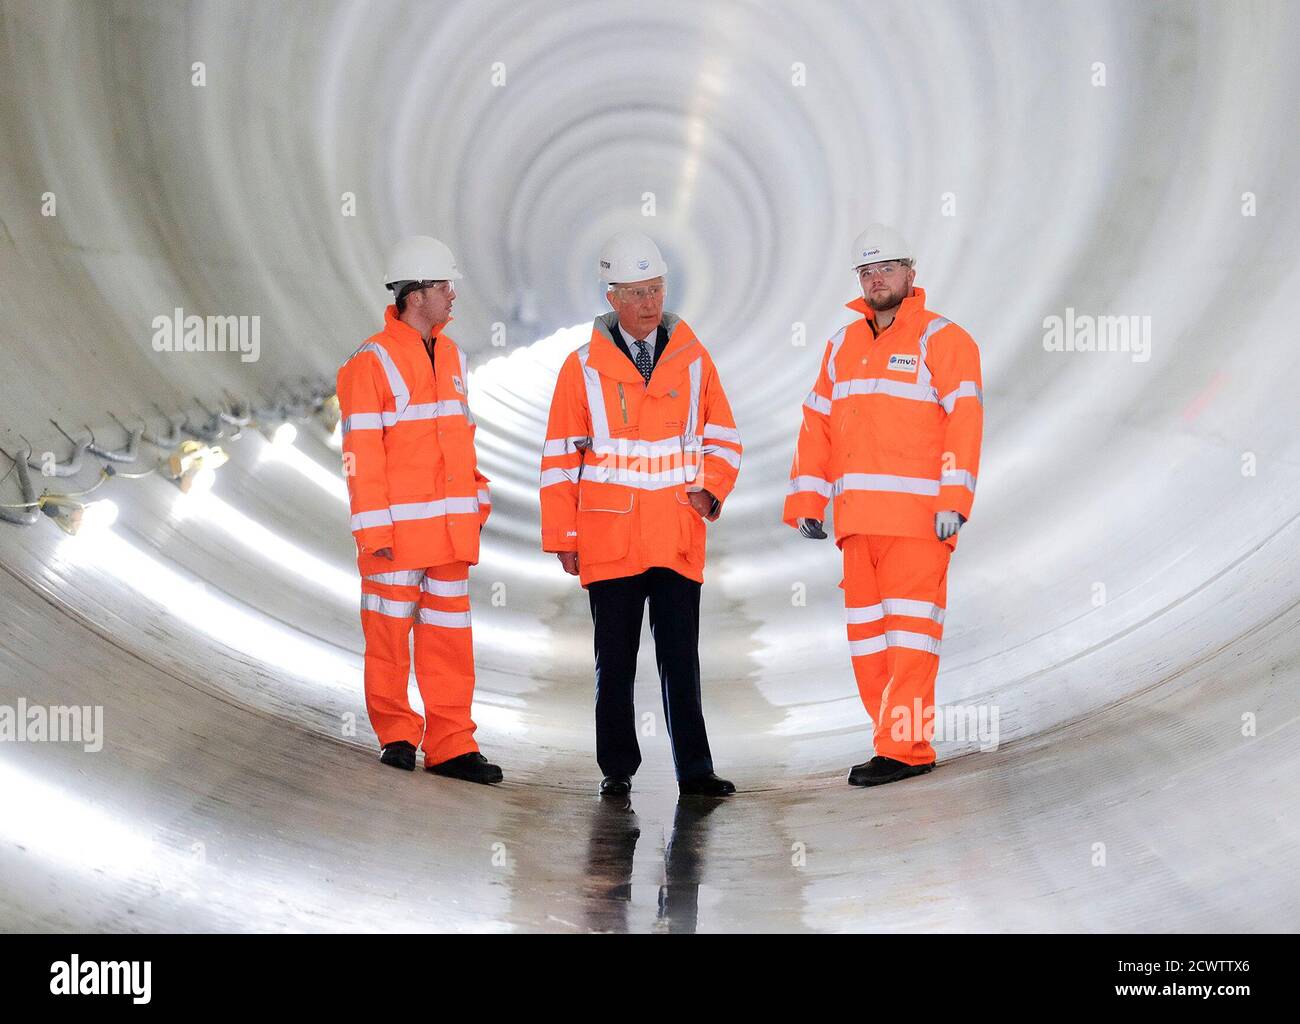 Britain's Prince Charles (C) visits the recently constructed Lee Tunnel to mark the 150th anniversary of London's sewer network at the Abbey Mills Pumping Station in East London,  February 18, 2015. REUTERS/POOL/Christopher Pledger (BRITAIN - Tags: ROYALS ENVIRONMENT) Stock Photo